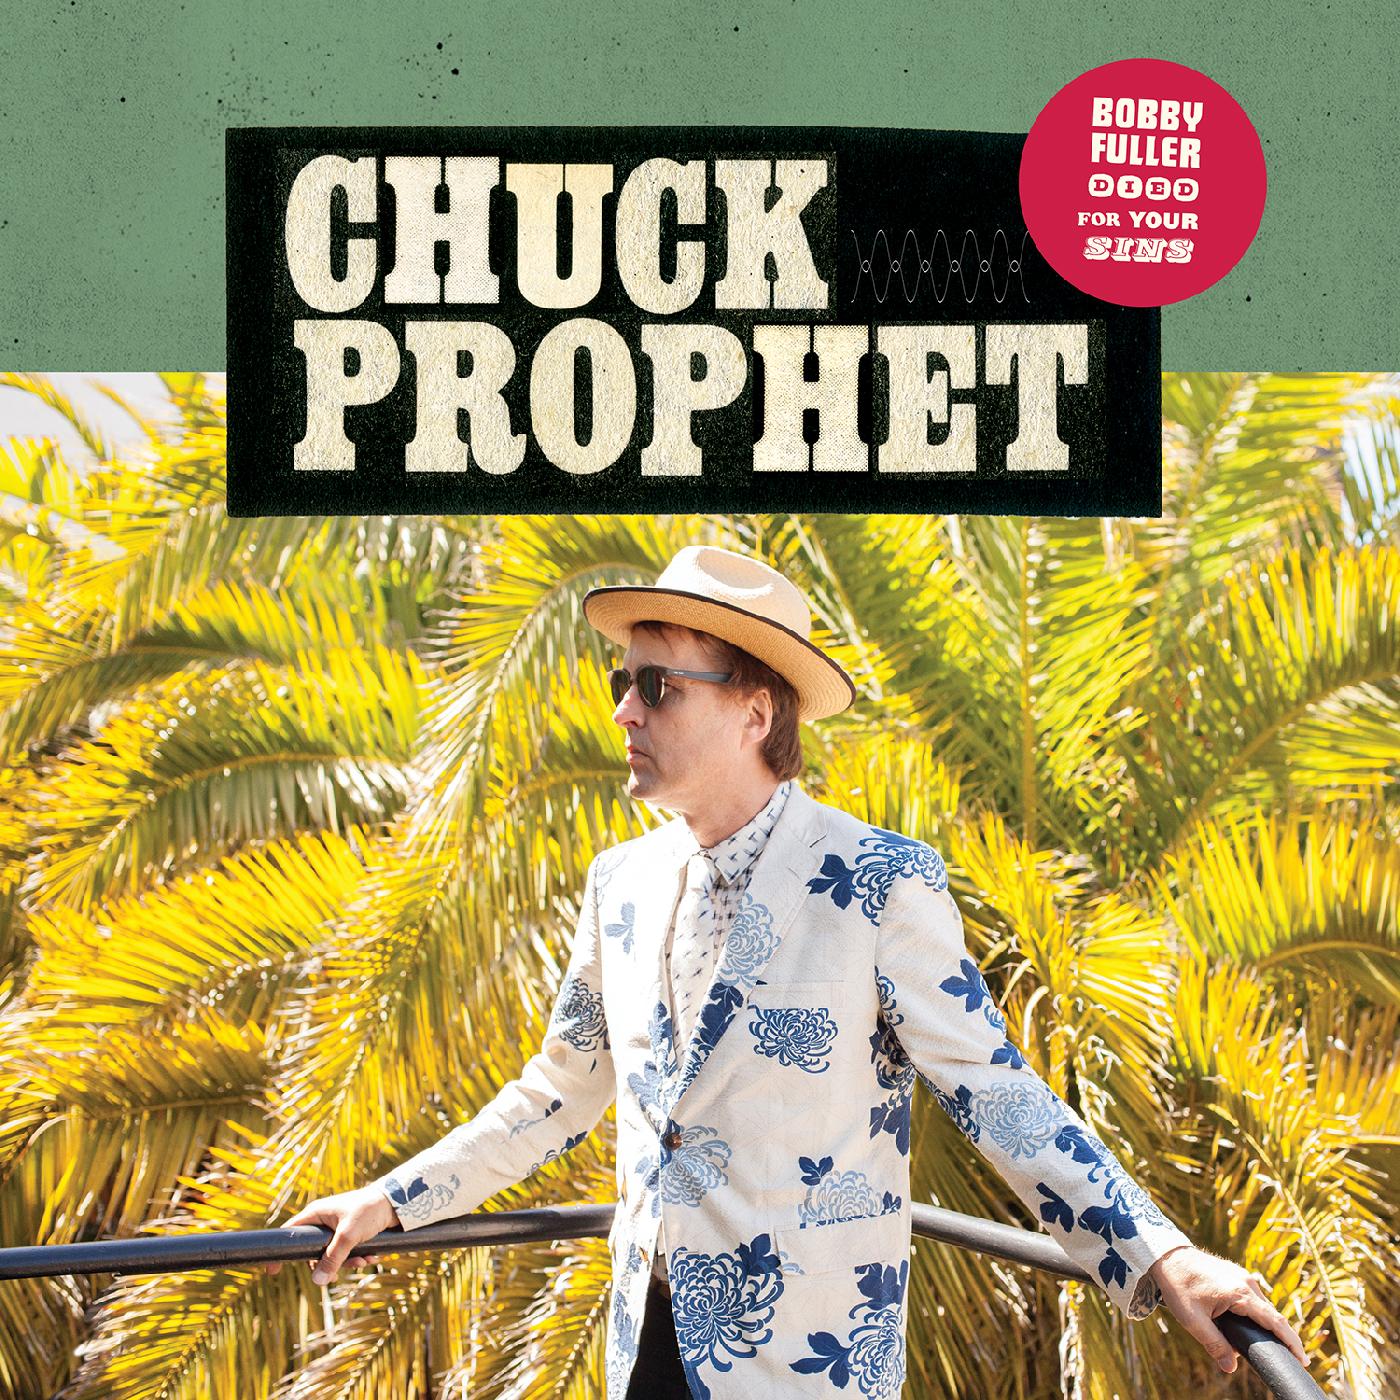 Chuck Prophet | Bobby Fuller Died For Your Sins (5th Anniversary Edition - Red Cloudy Vinyl) | Vinyl